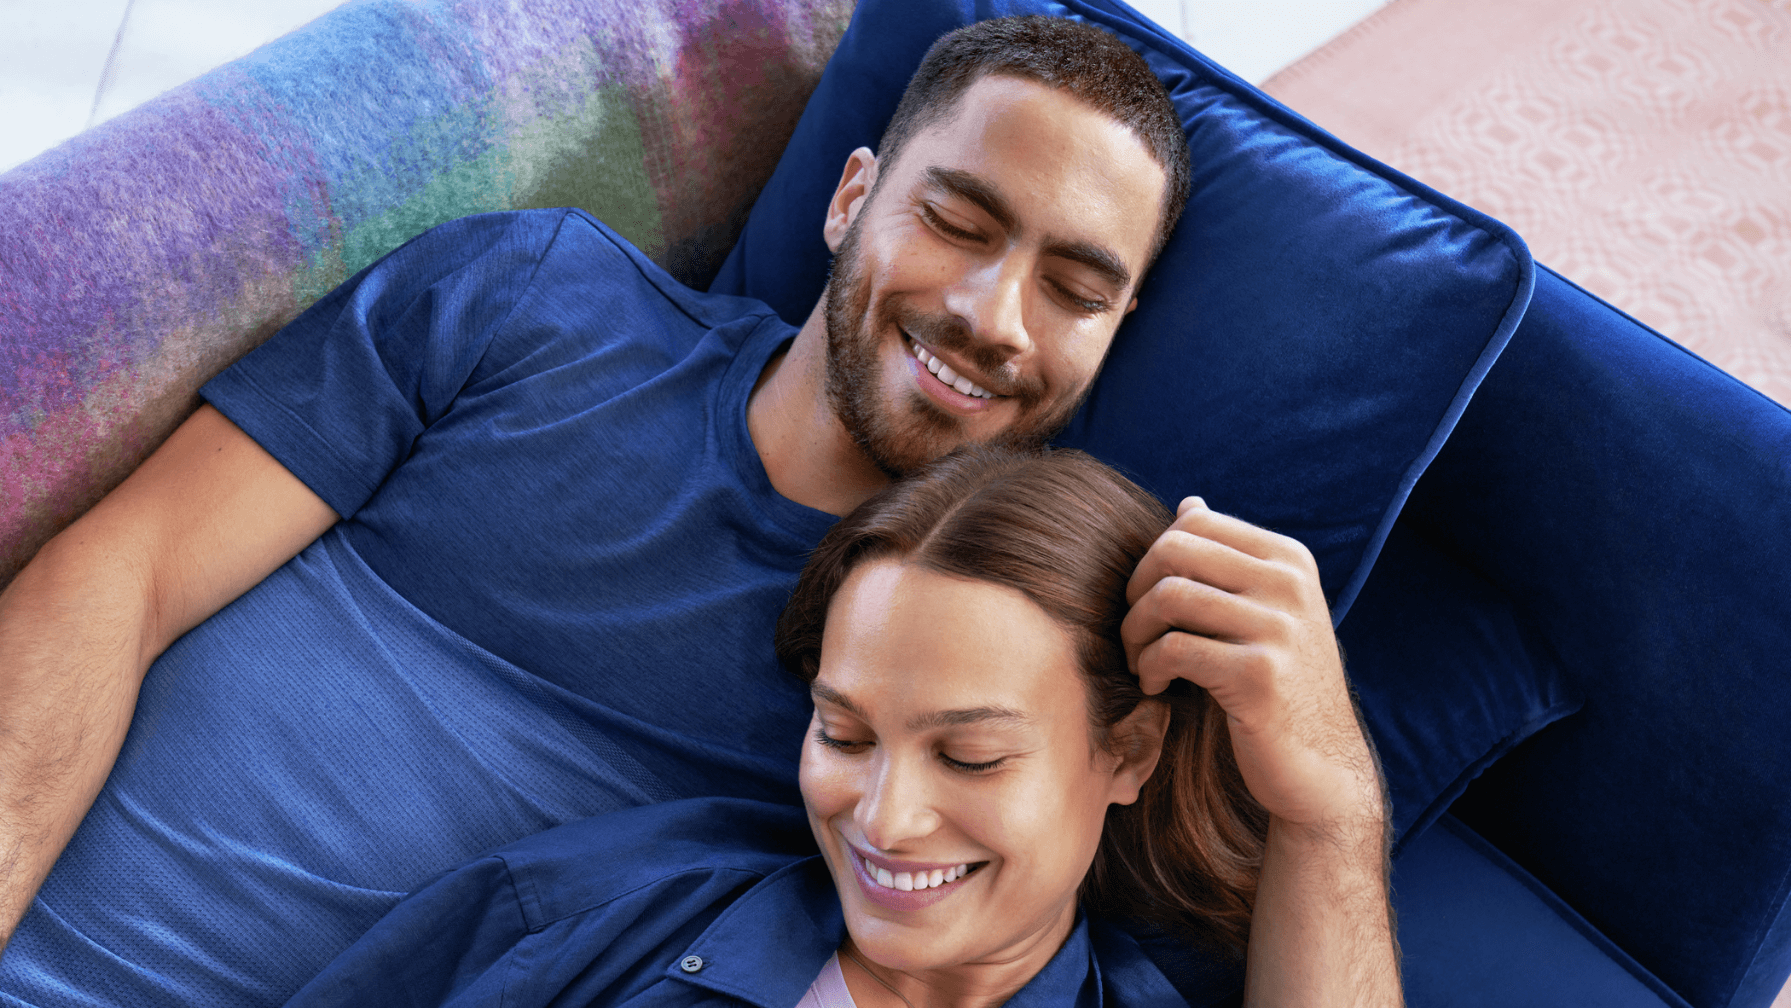 Man and woman, lying down on the couch, both smiling